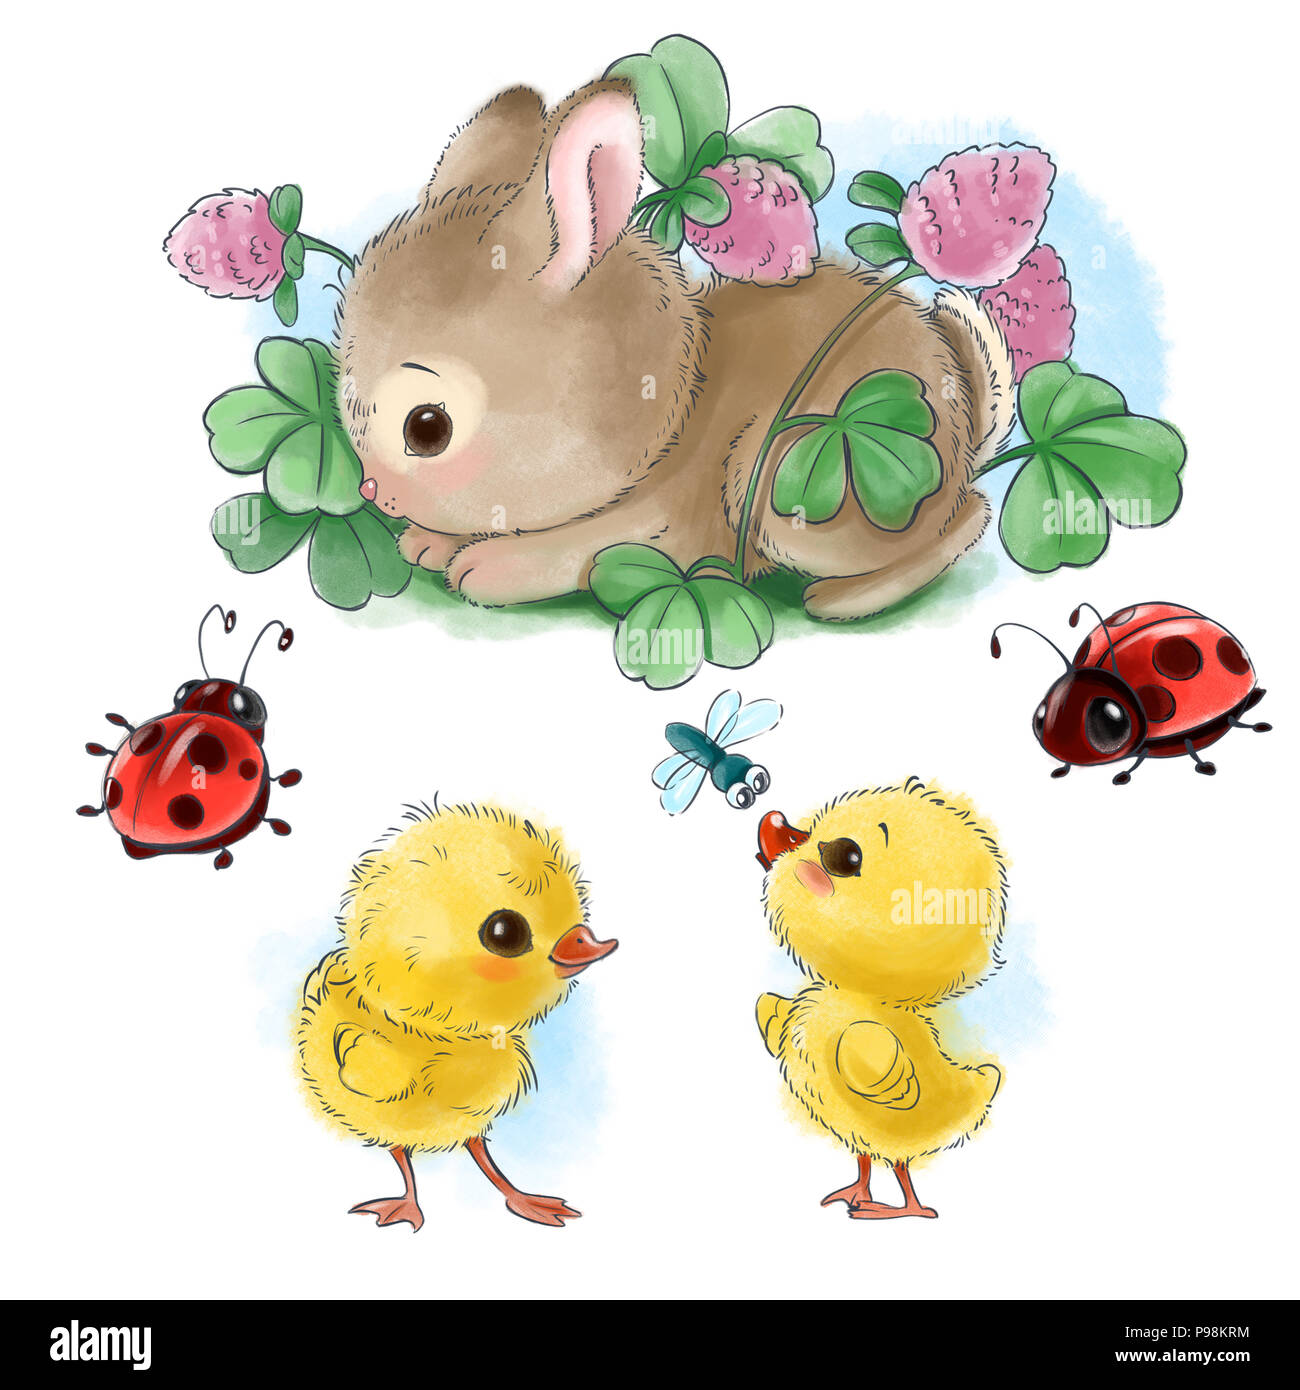 Happy bunny with Easter eggs, chicks and bugs cartoon isolated clipart on white background Stock Photo